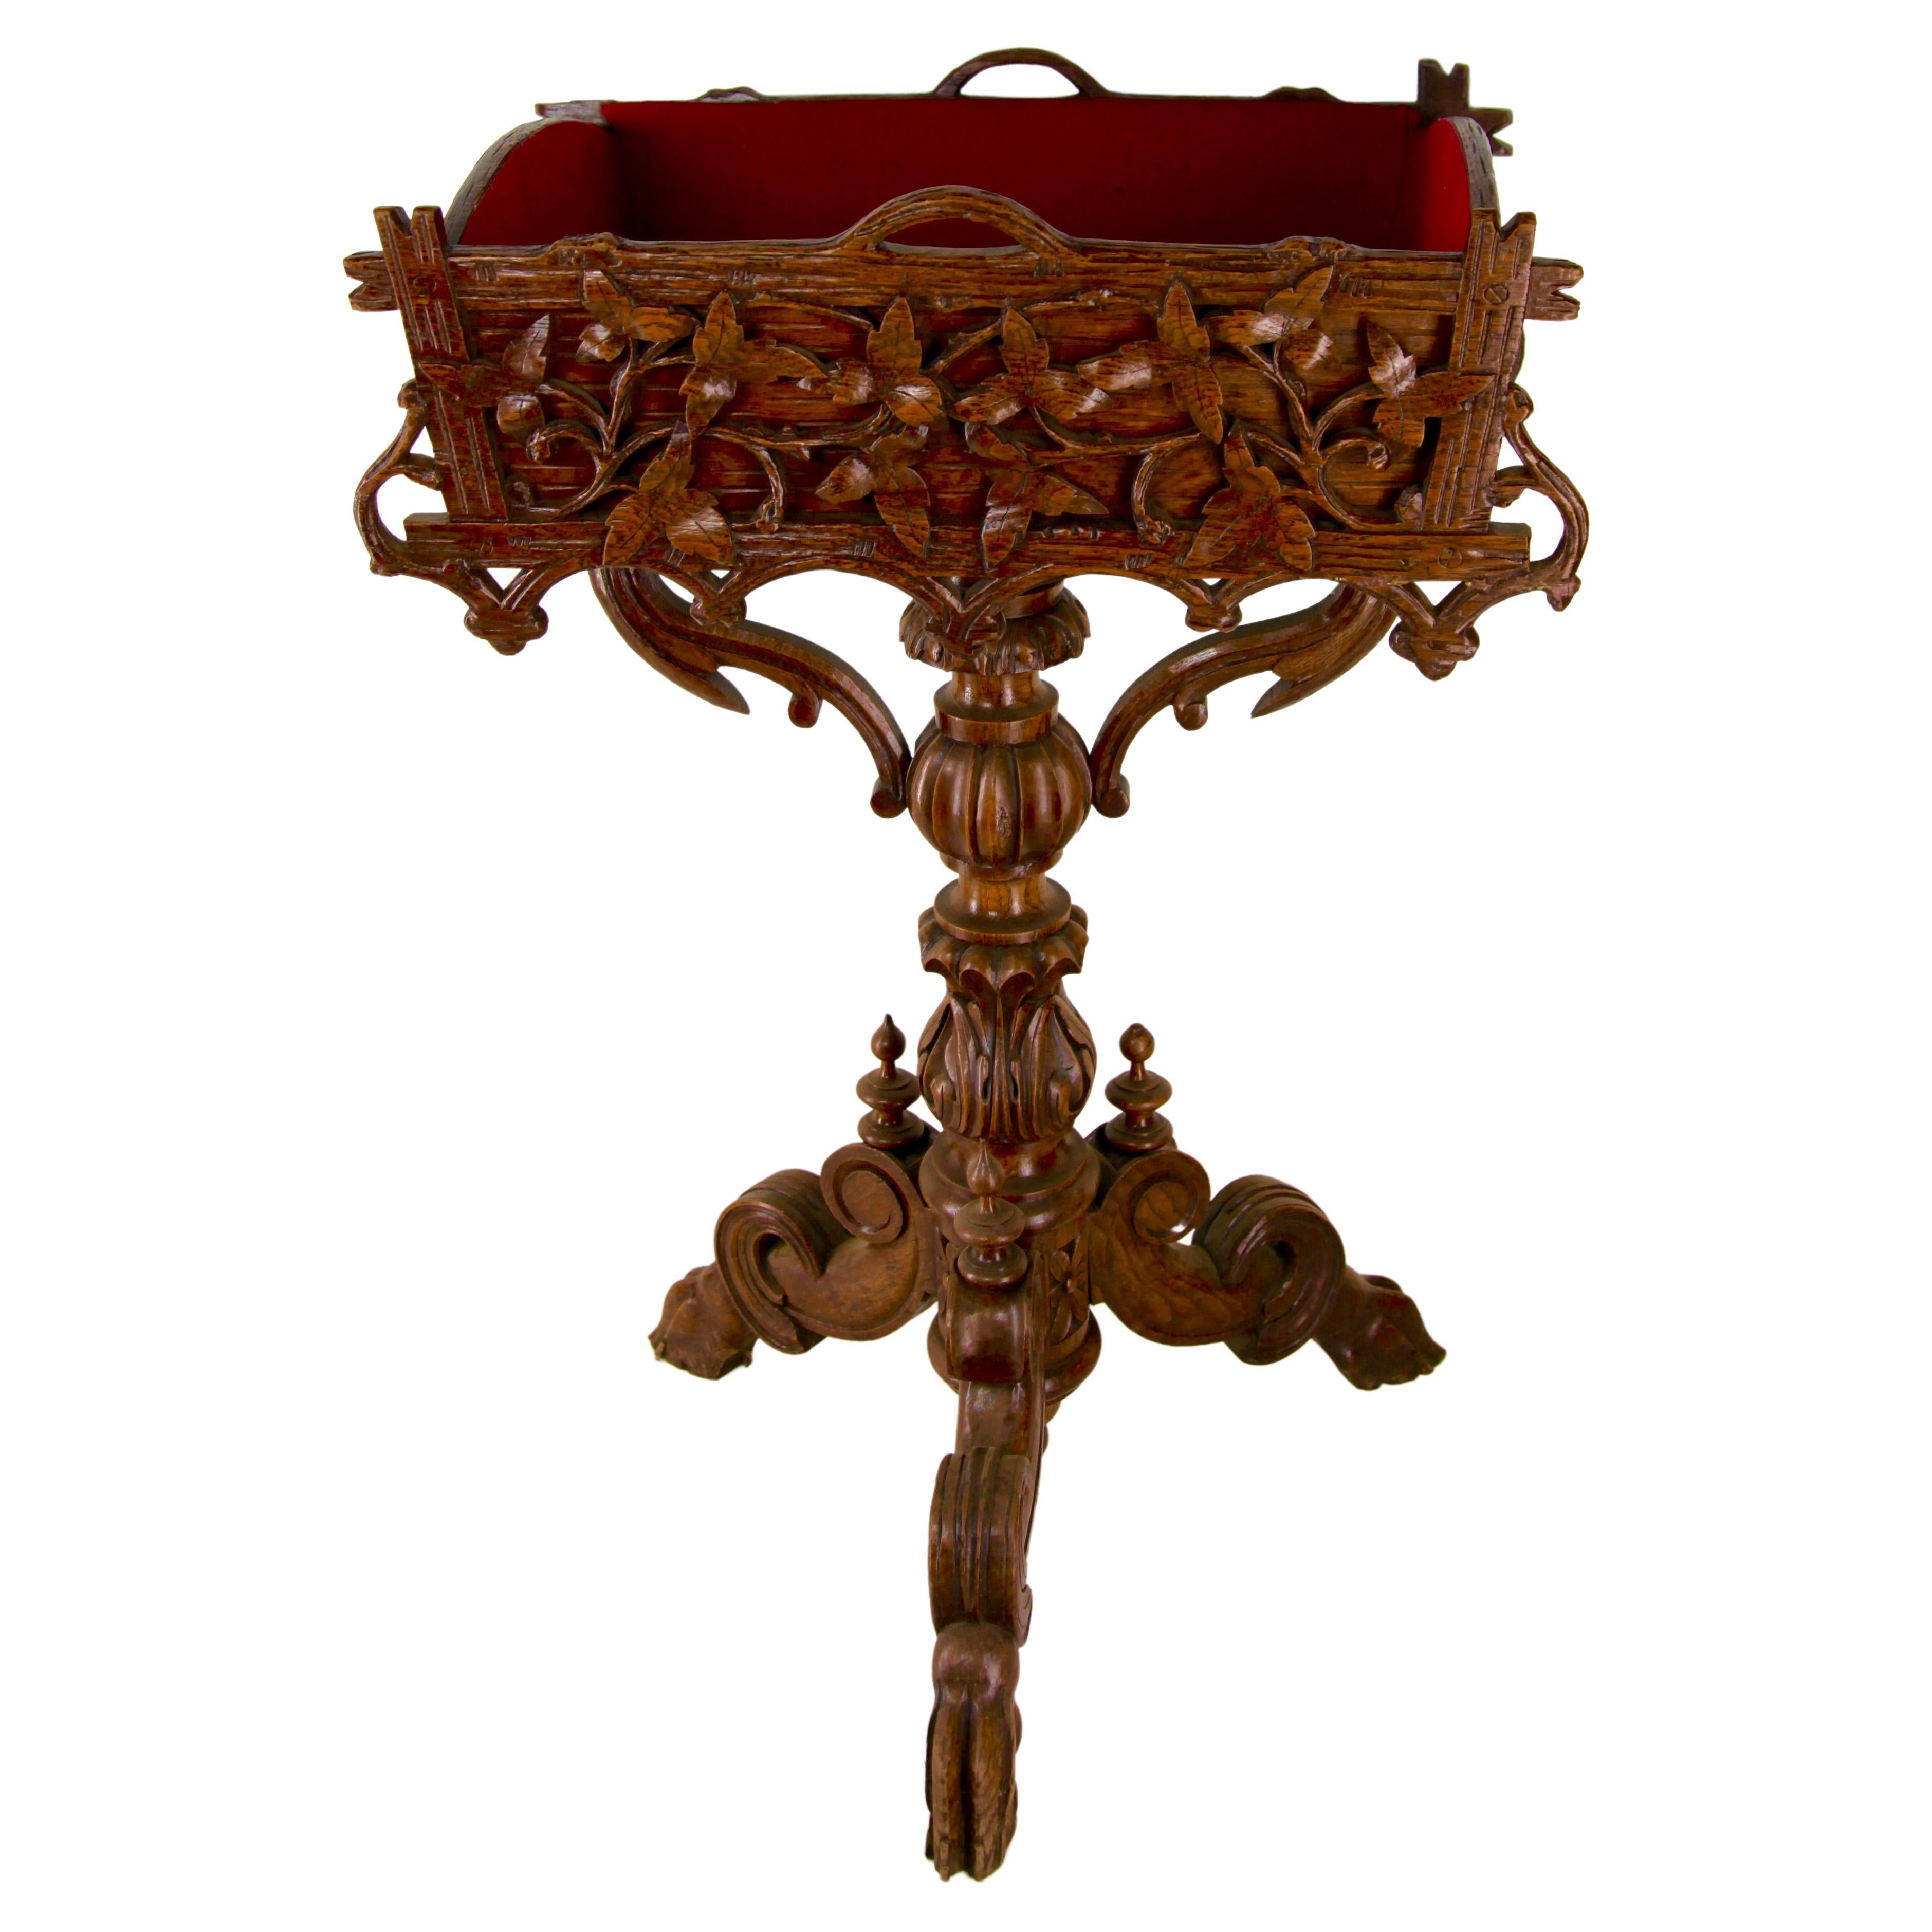 The Wooden Planter features a pierced carving of a floral basket flanked by scrolled Grapevines. And sides of the box are carved to look like rough wooden boards. Raised on a Turned and Hand Carved pedestal, the pedestal are joined whit two carved